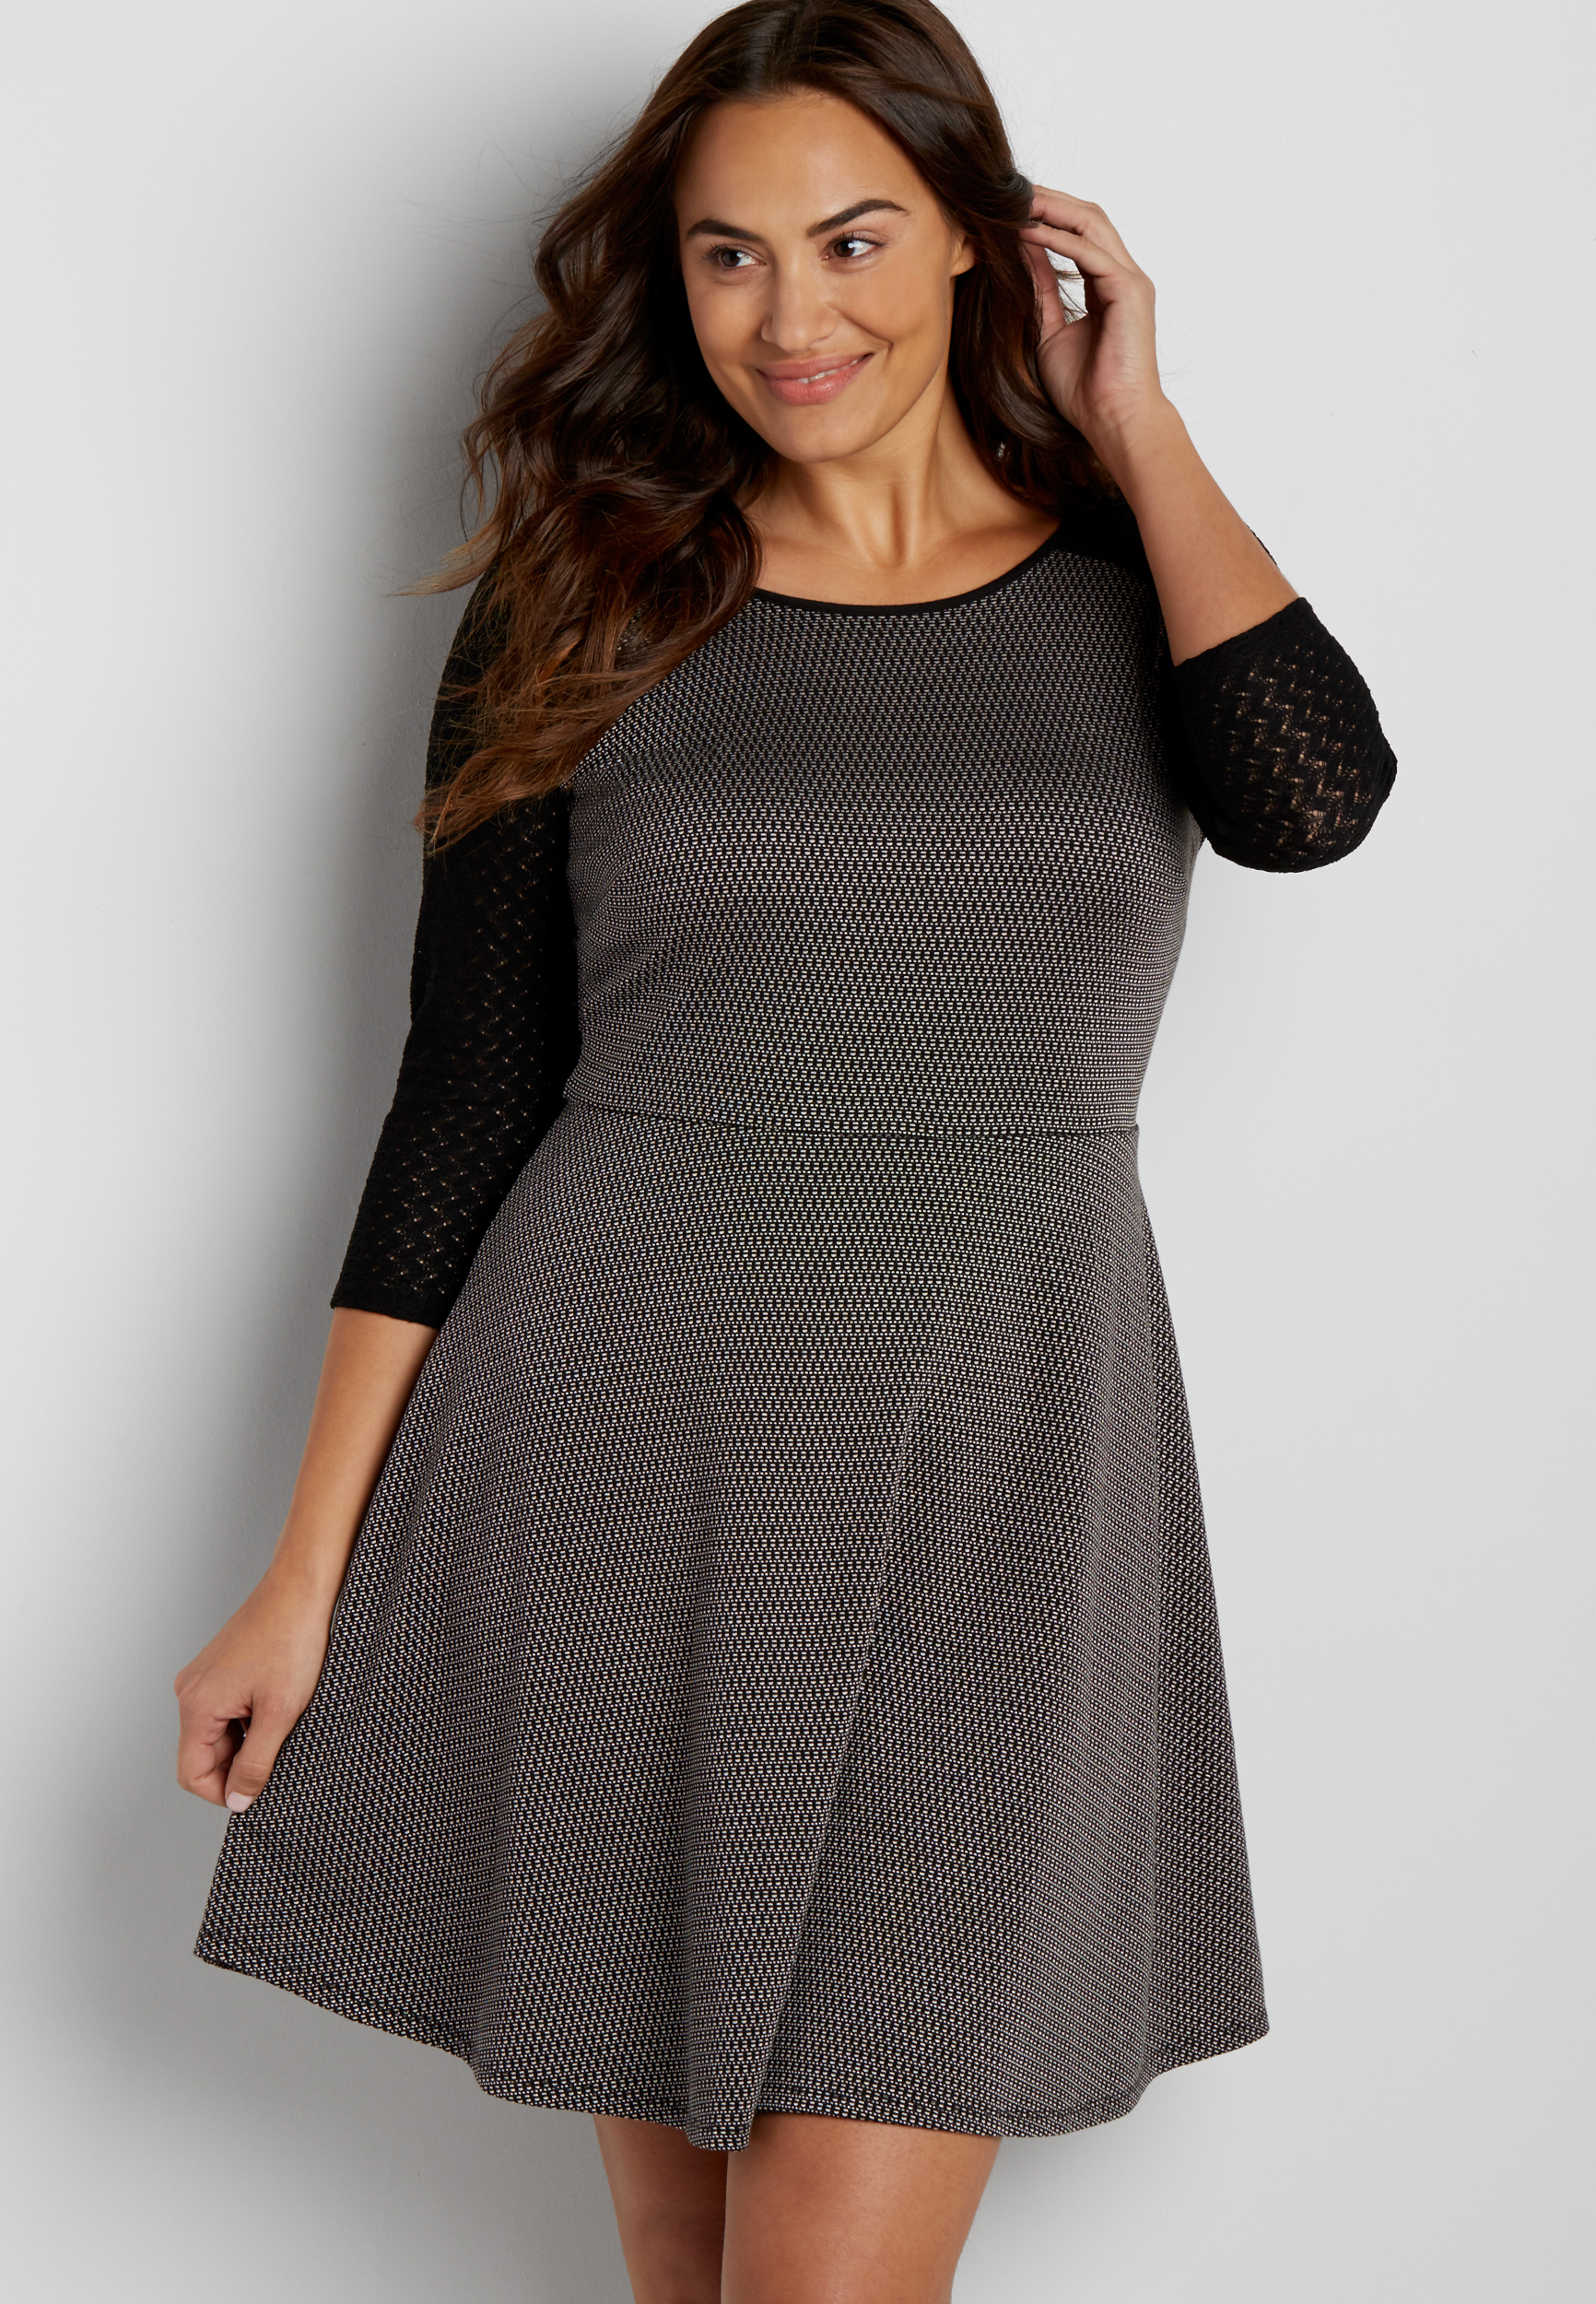 plus size patterned skater dress with lace sleeves | maurices